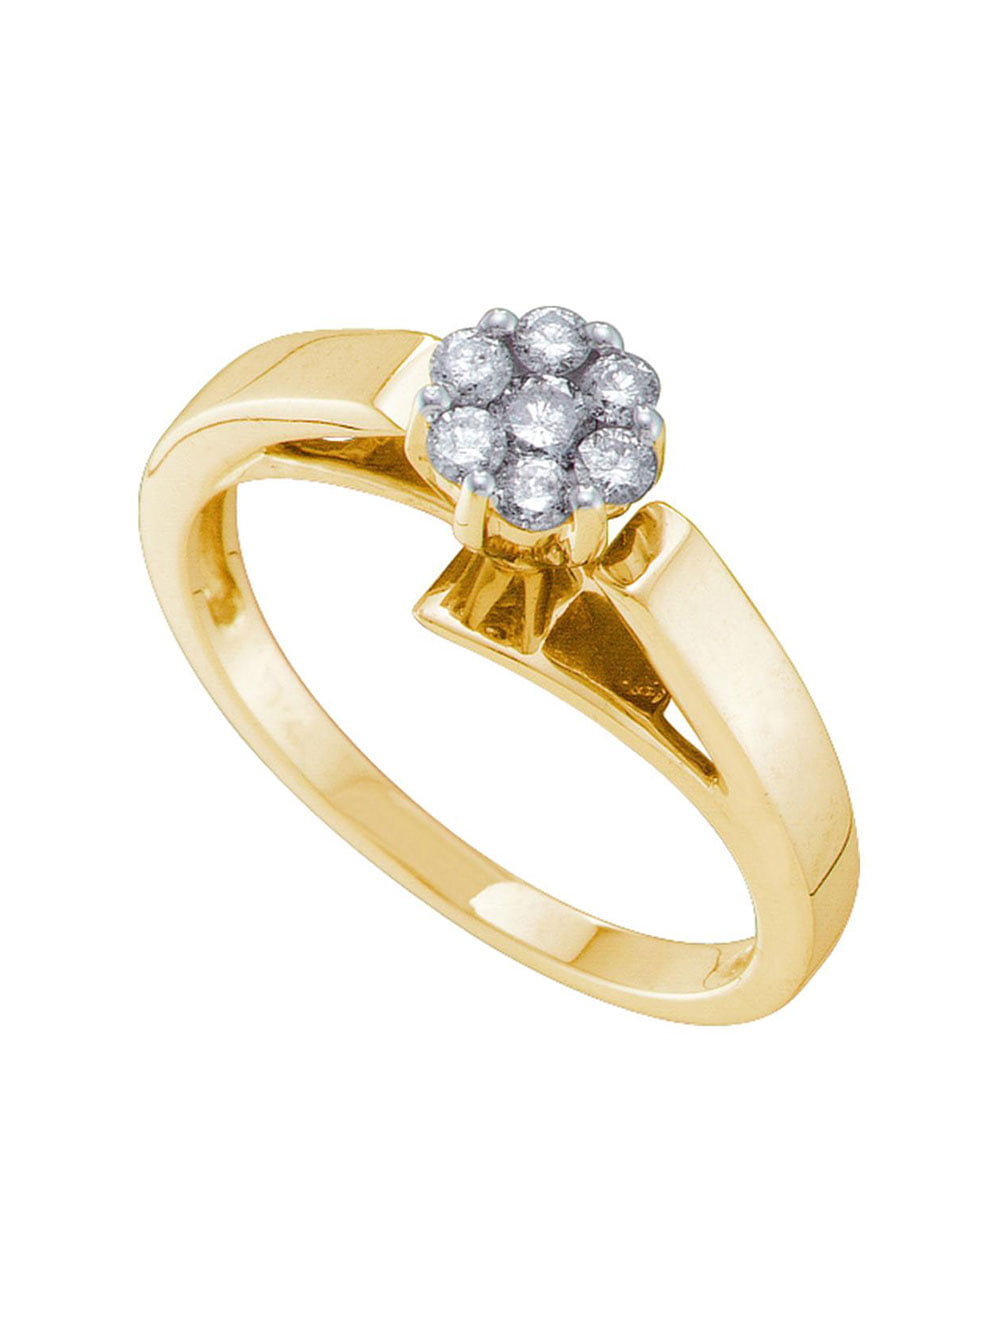 1/4 Ct Diamond Cluster bridal Flower Ring in 9K Solid Gold 